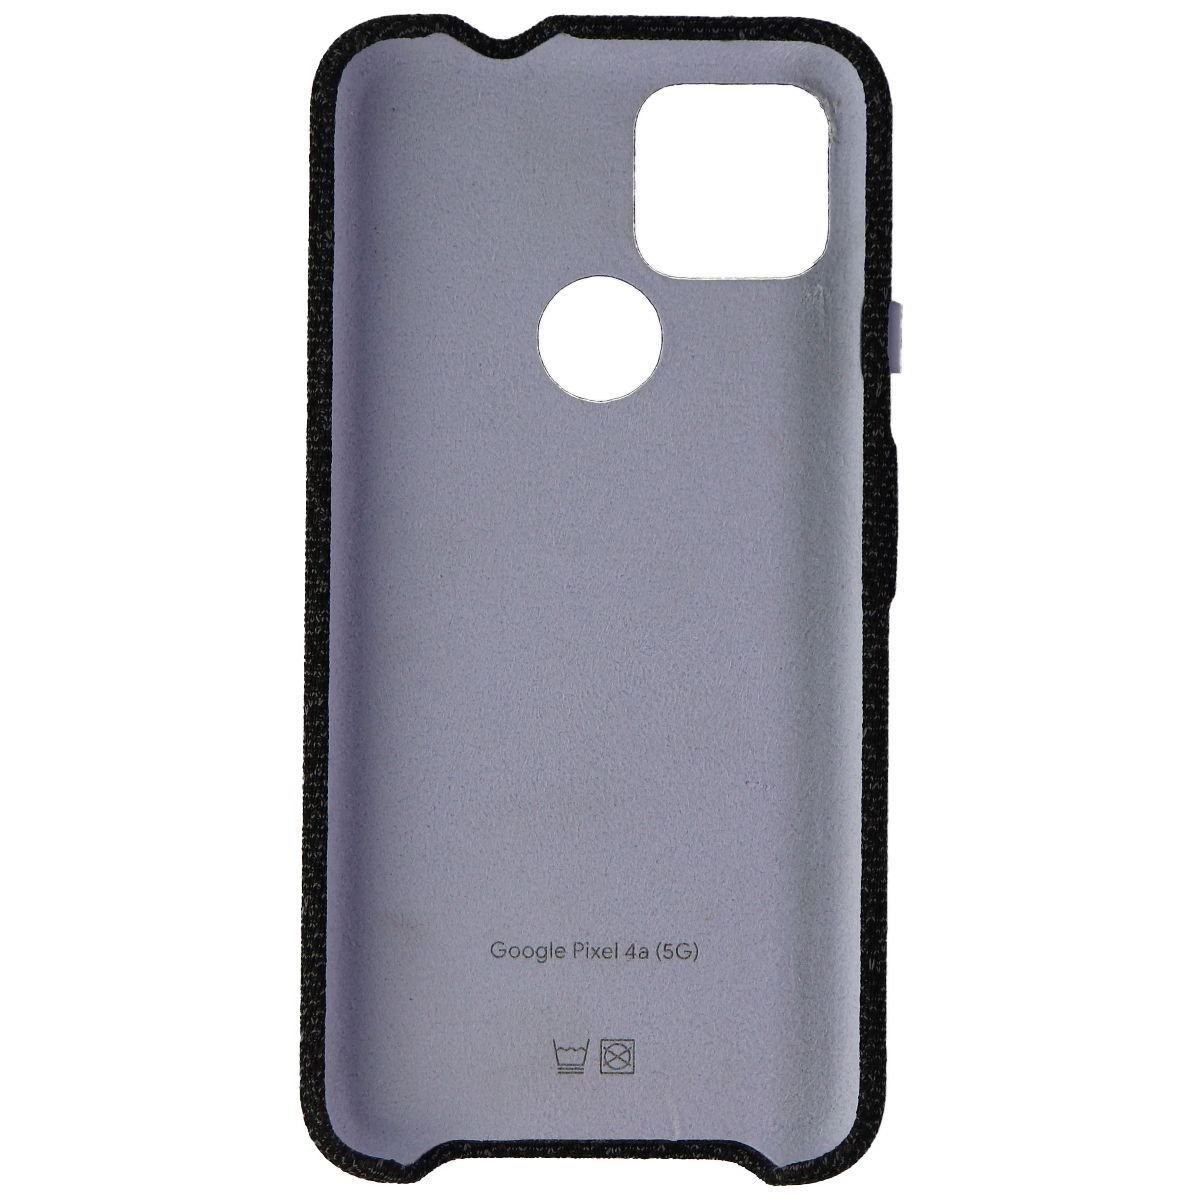 Google Official Fabric Case For Google Pixel 4a 5G - Basically Black